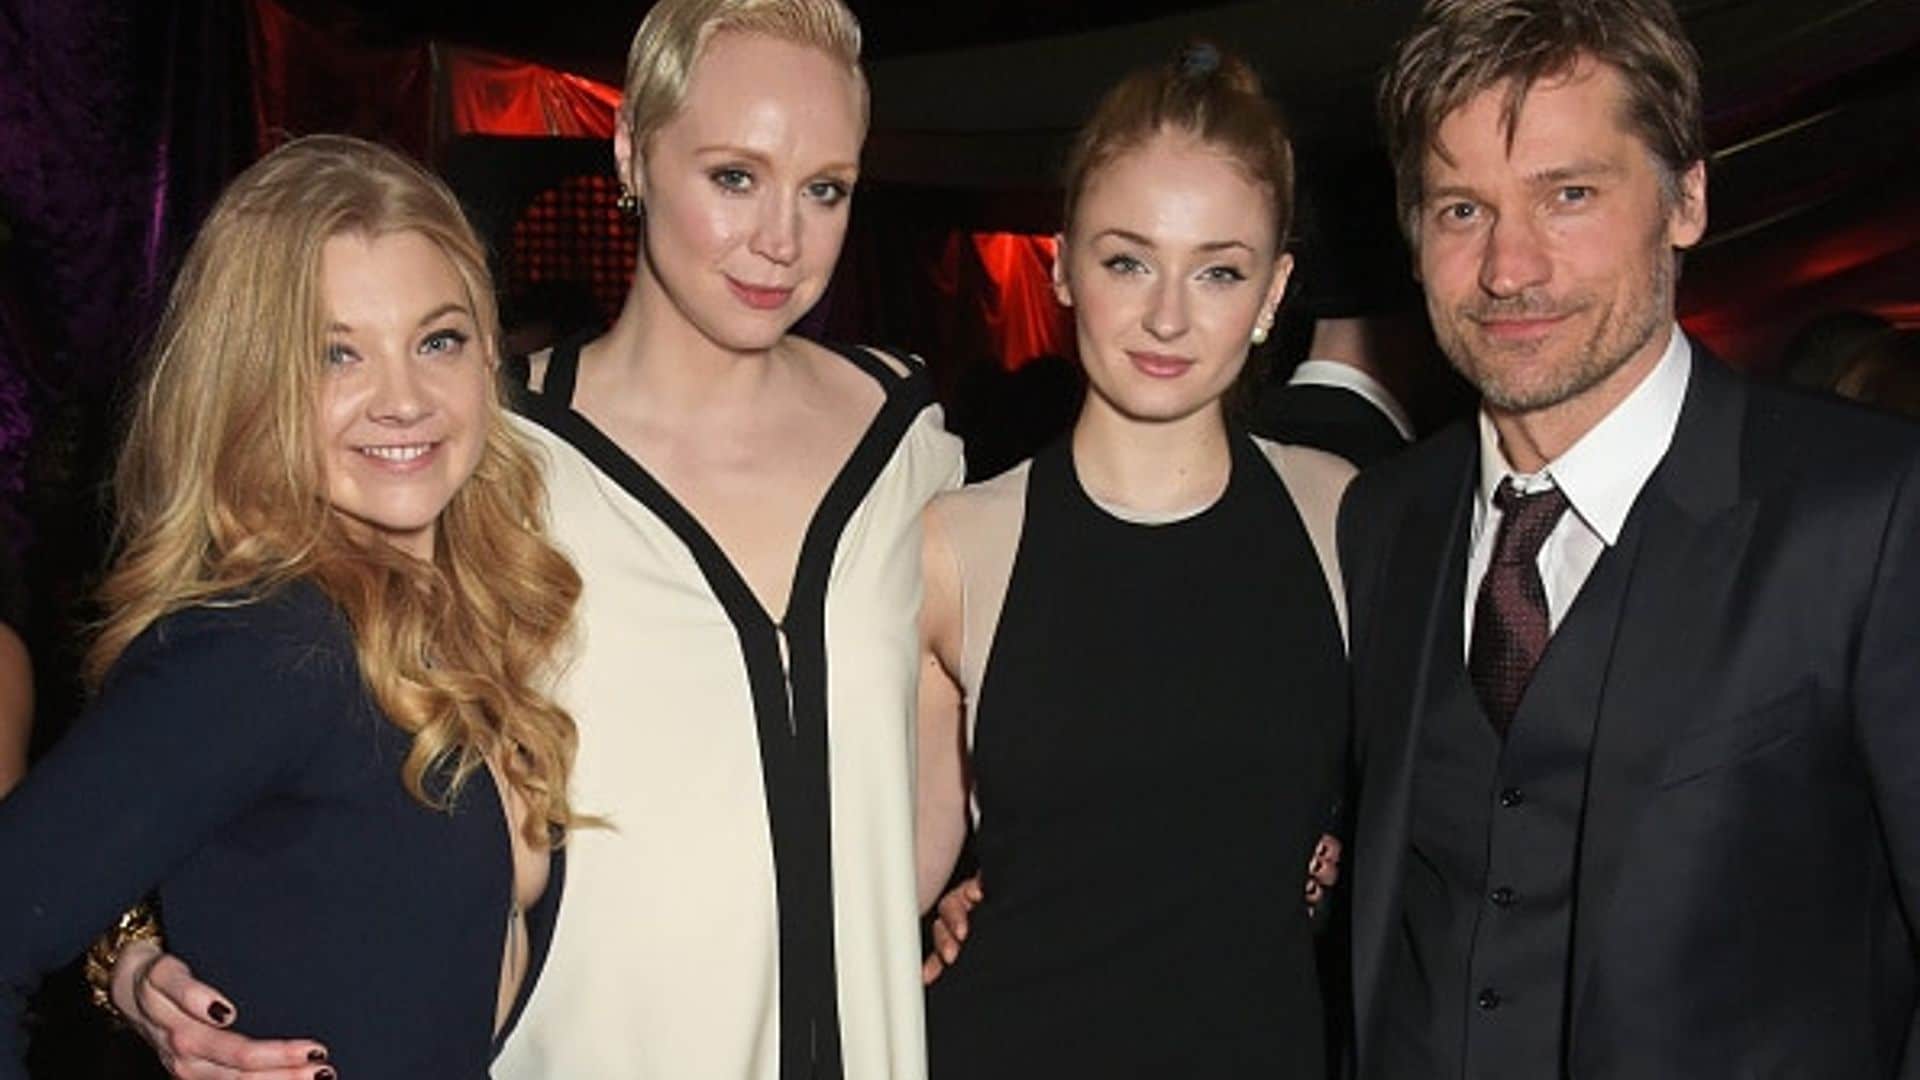 Natalie Dormer, Gwendoline Christie, Sophie Turner and Nikolaj Coster-Waldau attend the "Game Of Thrones: Season 5" UK Premiere After Party at the Tower of London.
Photo: Getty Images